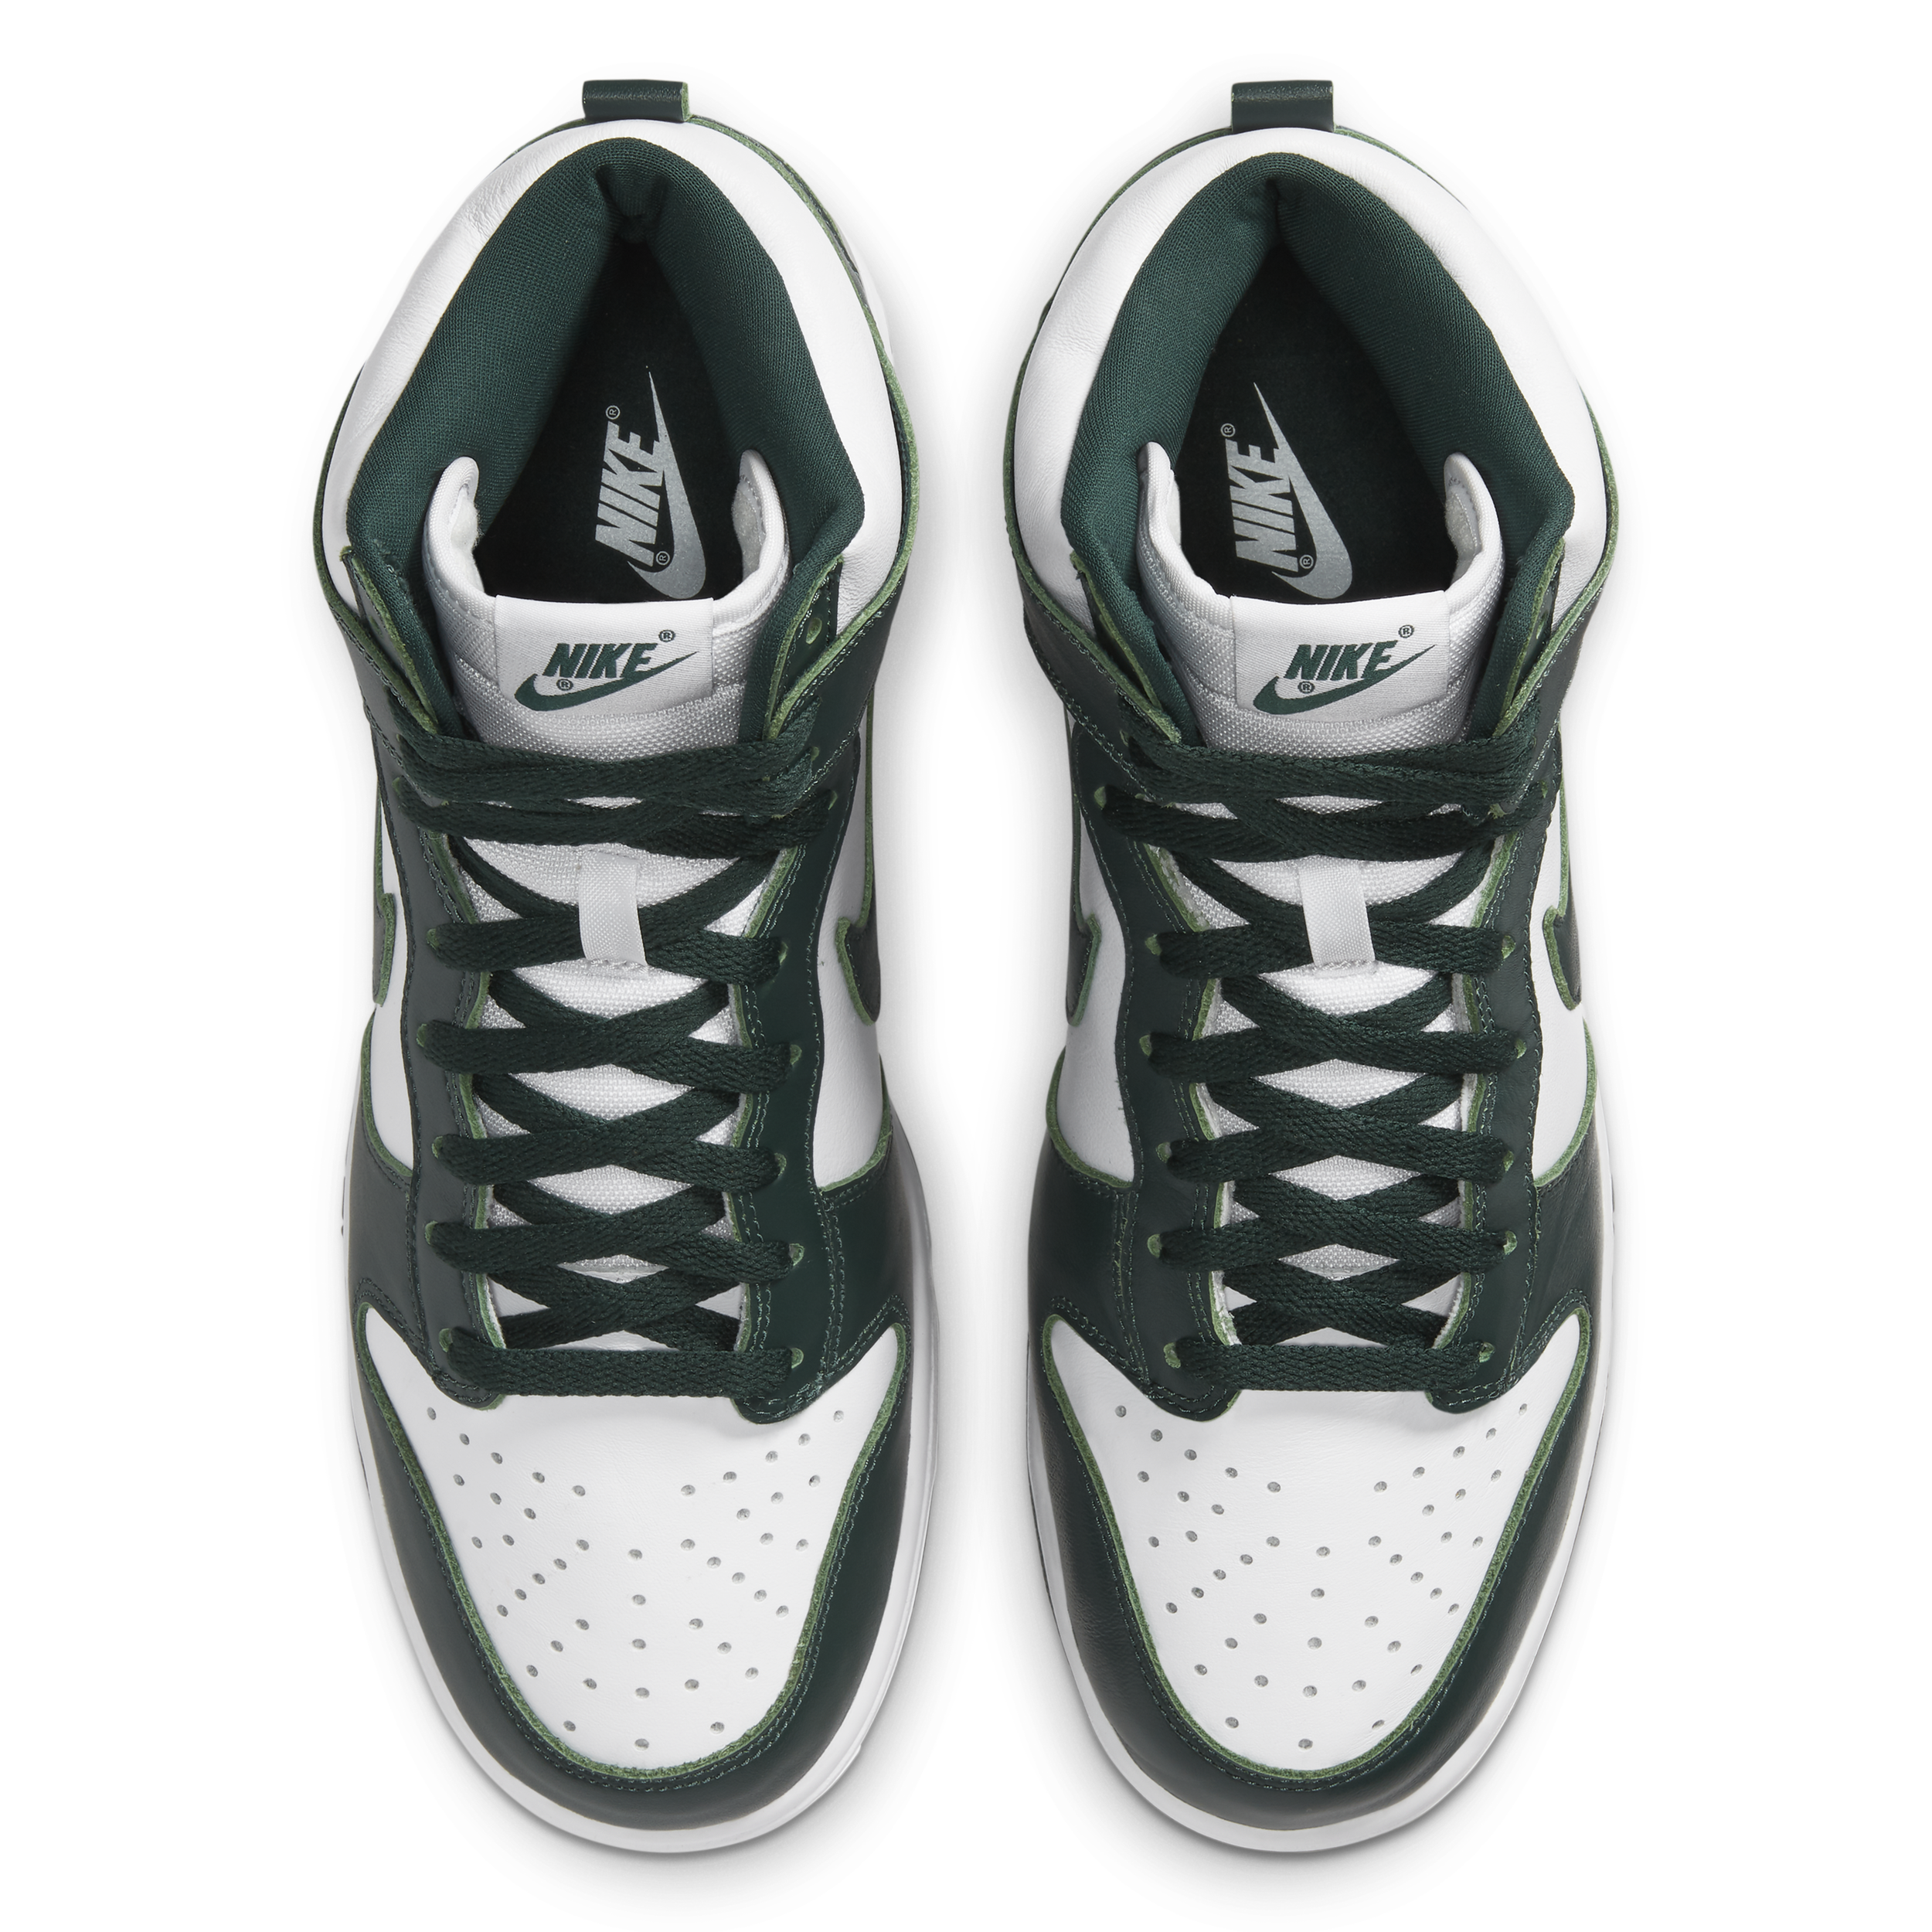 CNK-nike-dunk-high-pine-green-michigan-state-release-date-2020 (1).png